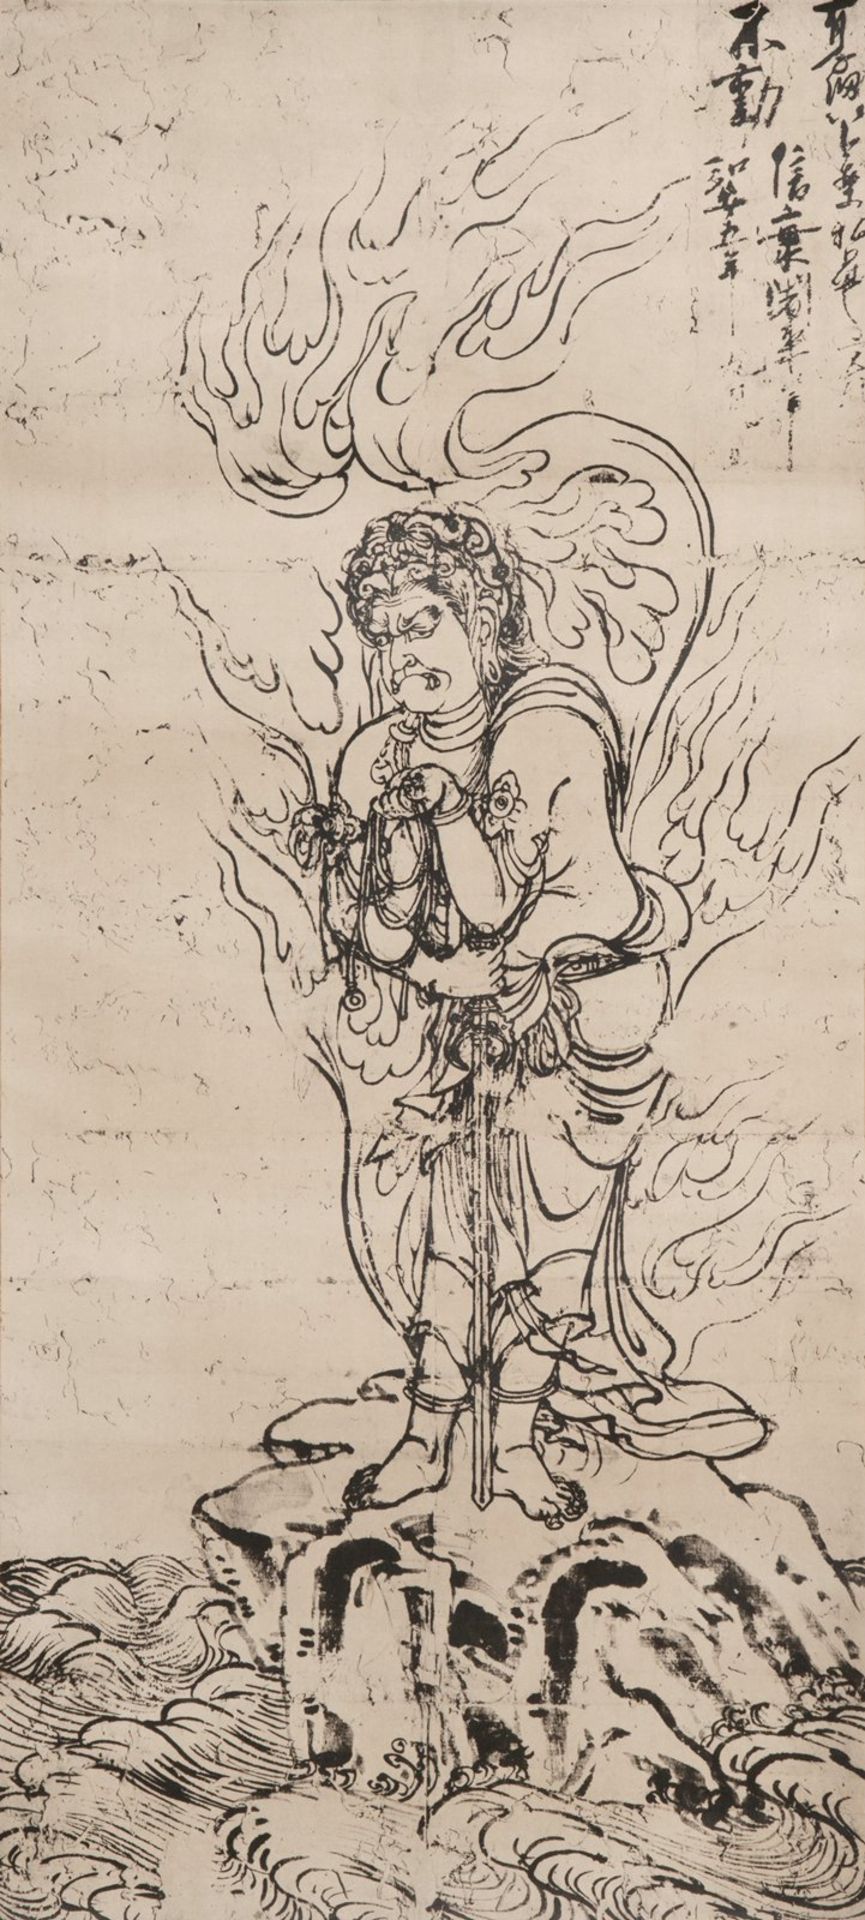 A CALLIGRAPHY AND TWO PRINTS DEPICTING A GUARDIAN FIGURE AND A VILLAGE SCENE